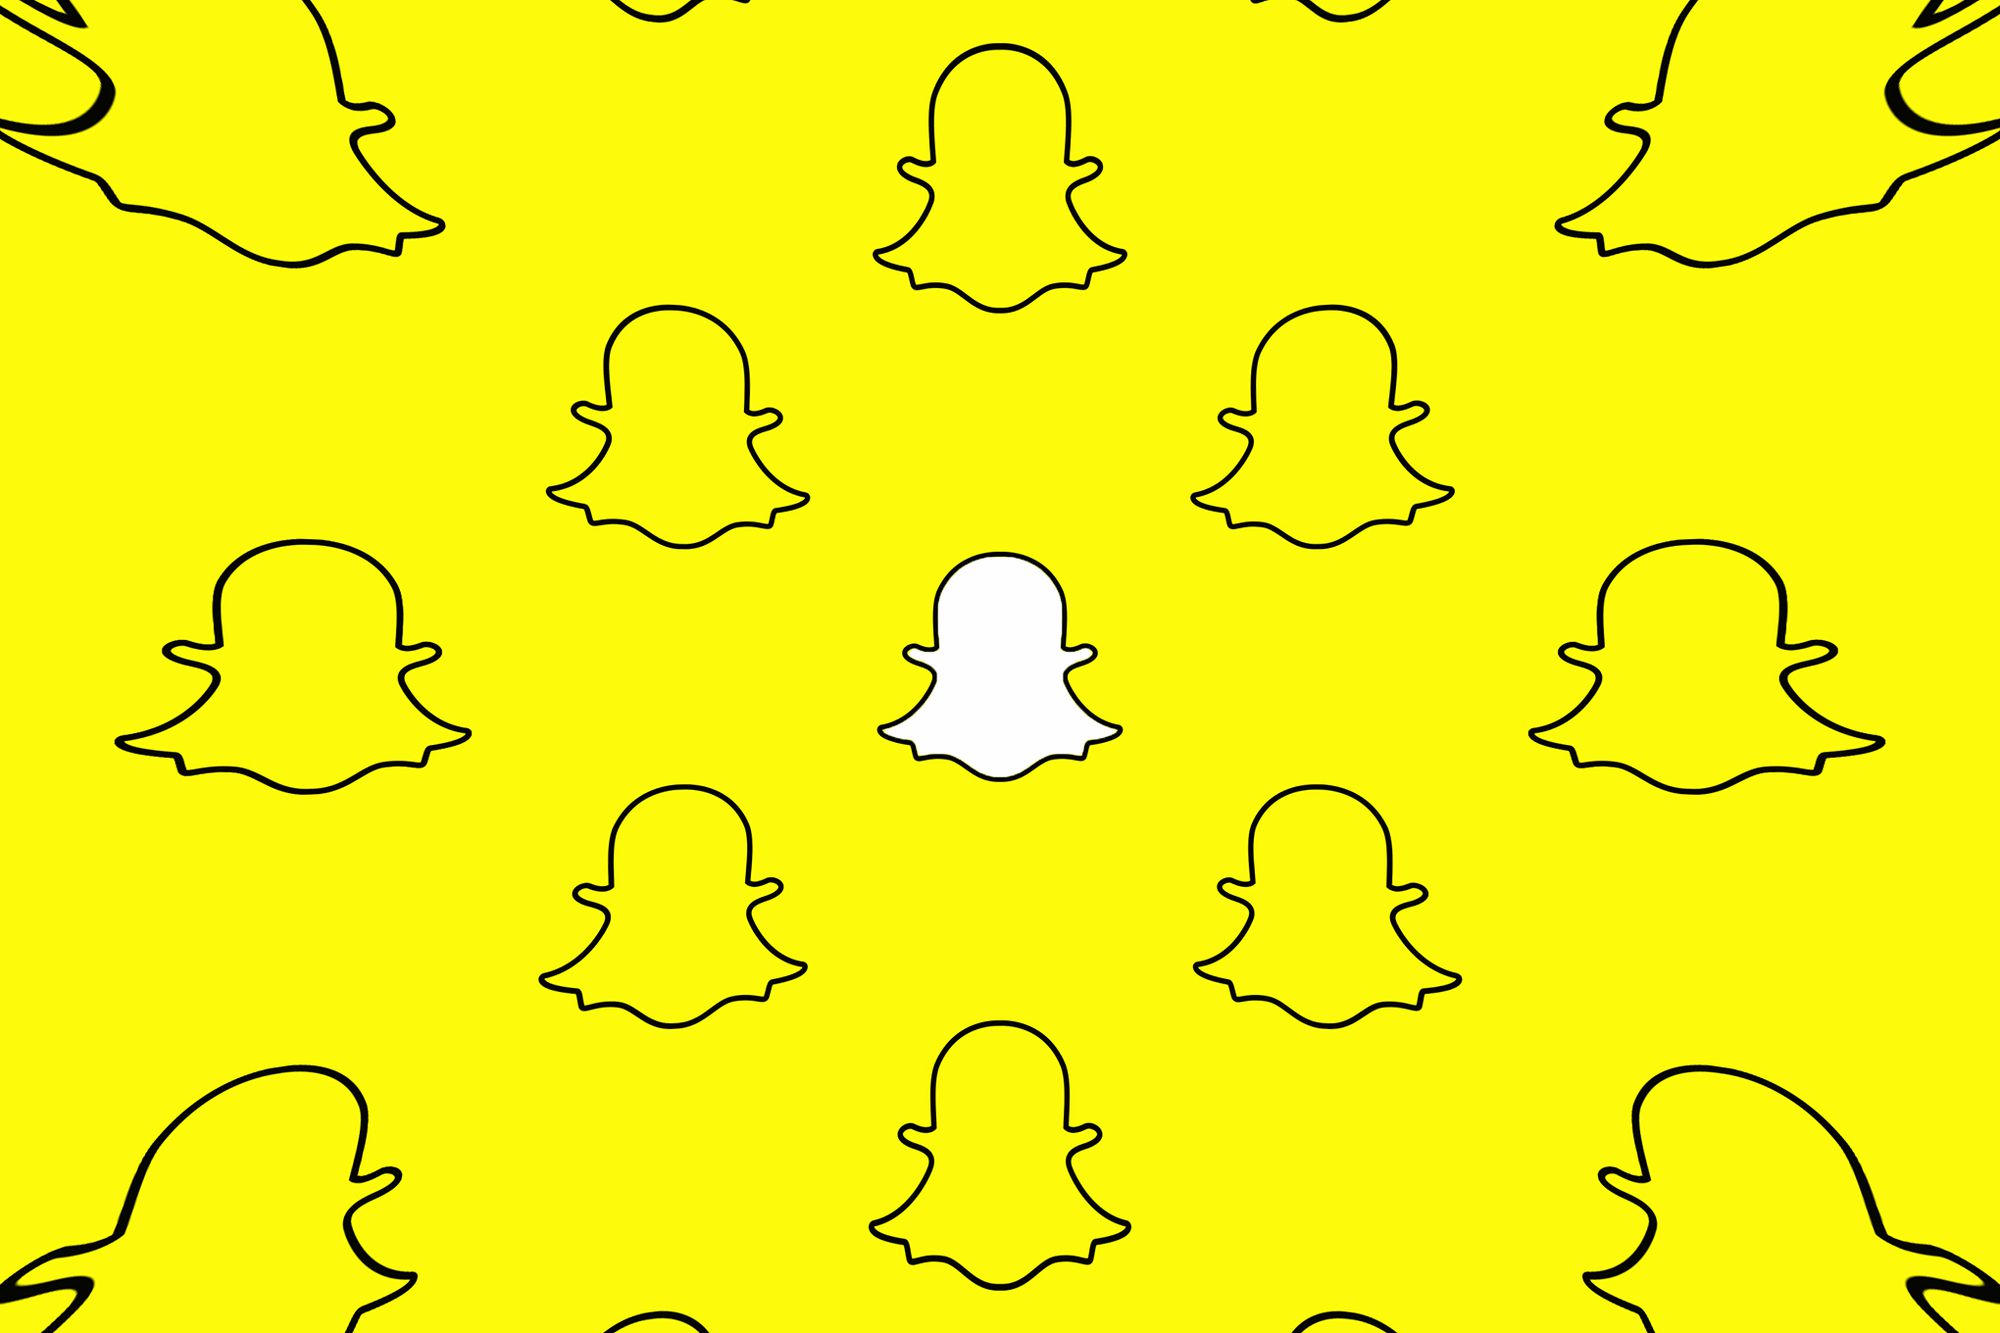 Snapchat hits new milestone with 750 million monthly active users